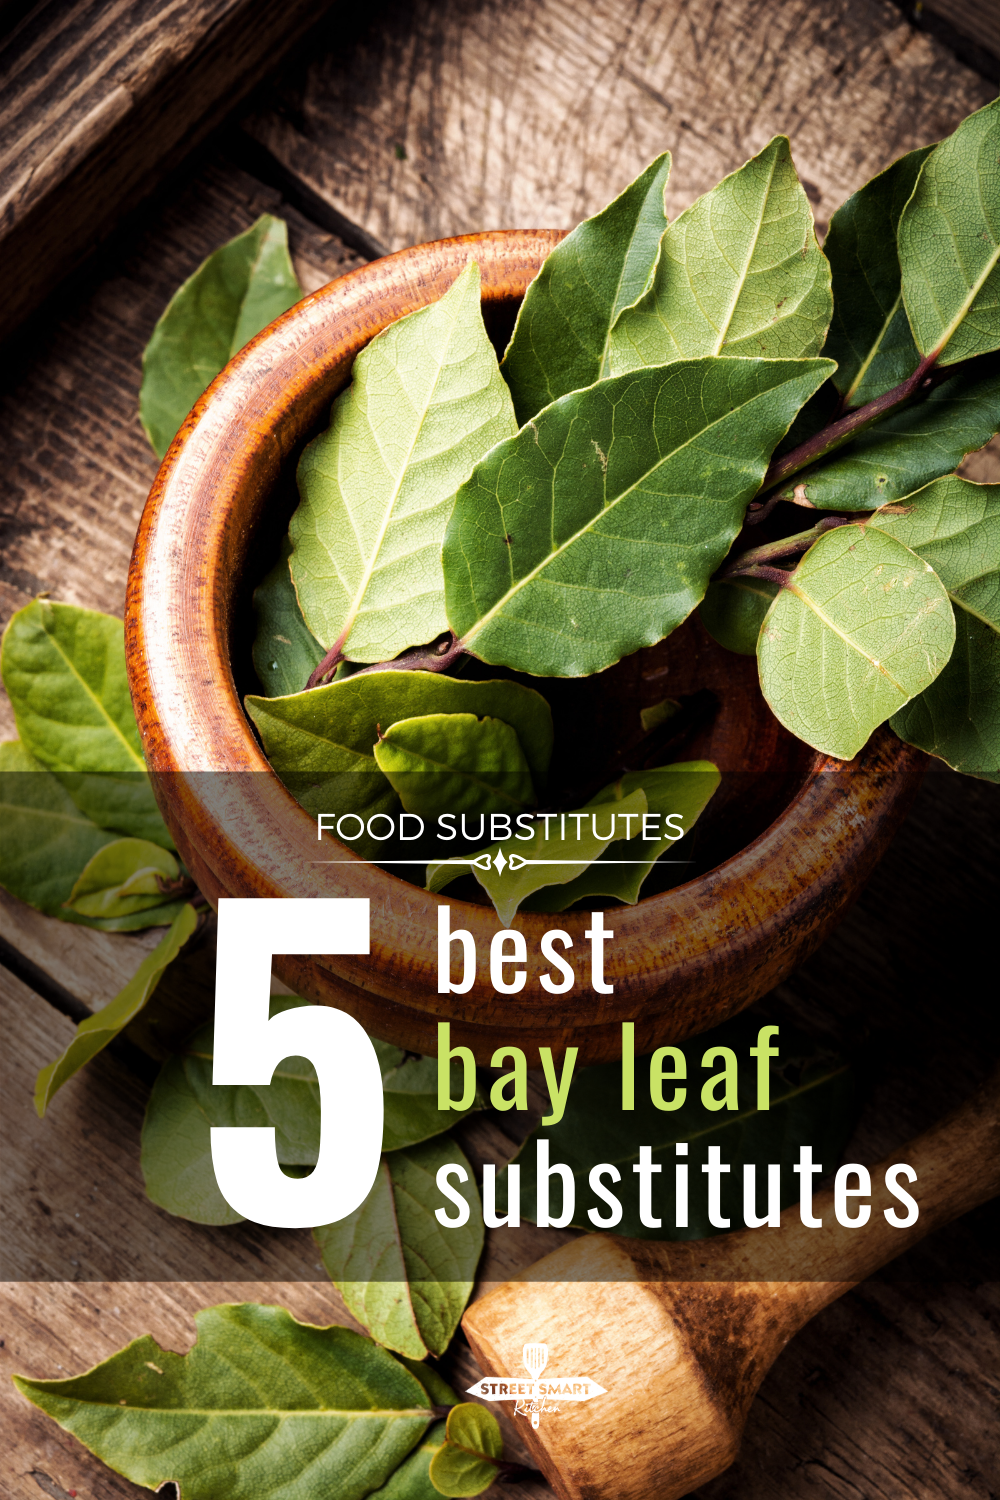 The Best Bay Leaf Substitute (5 Options) - Pin